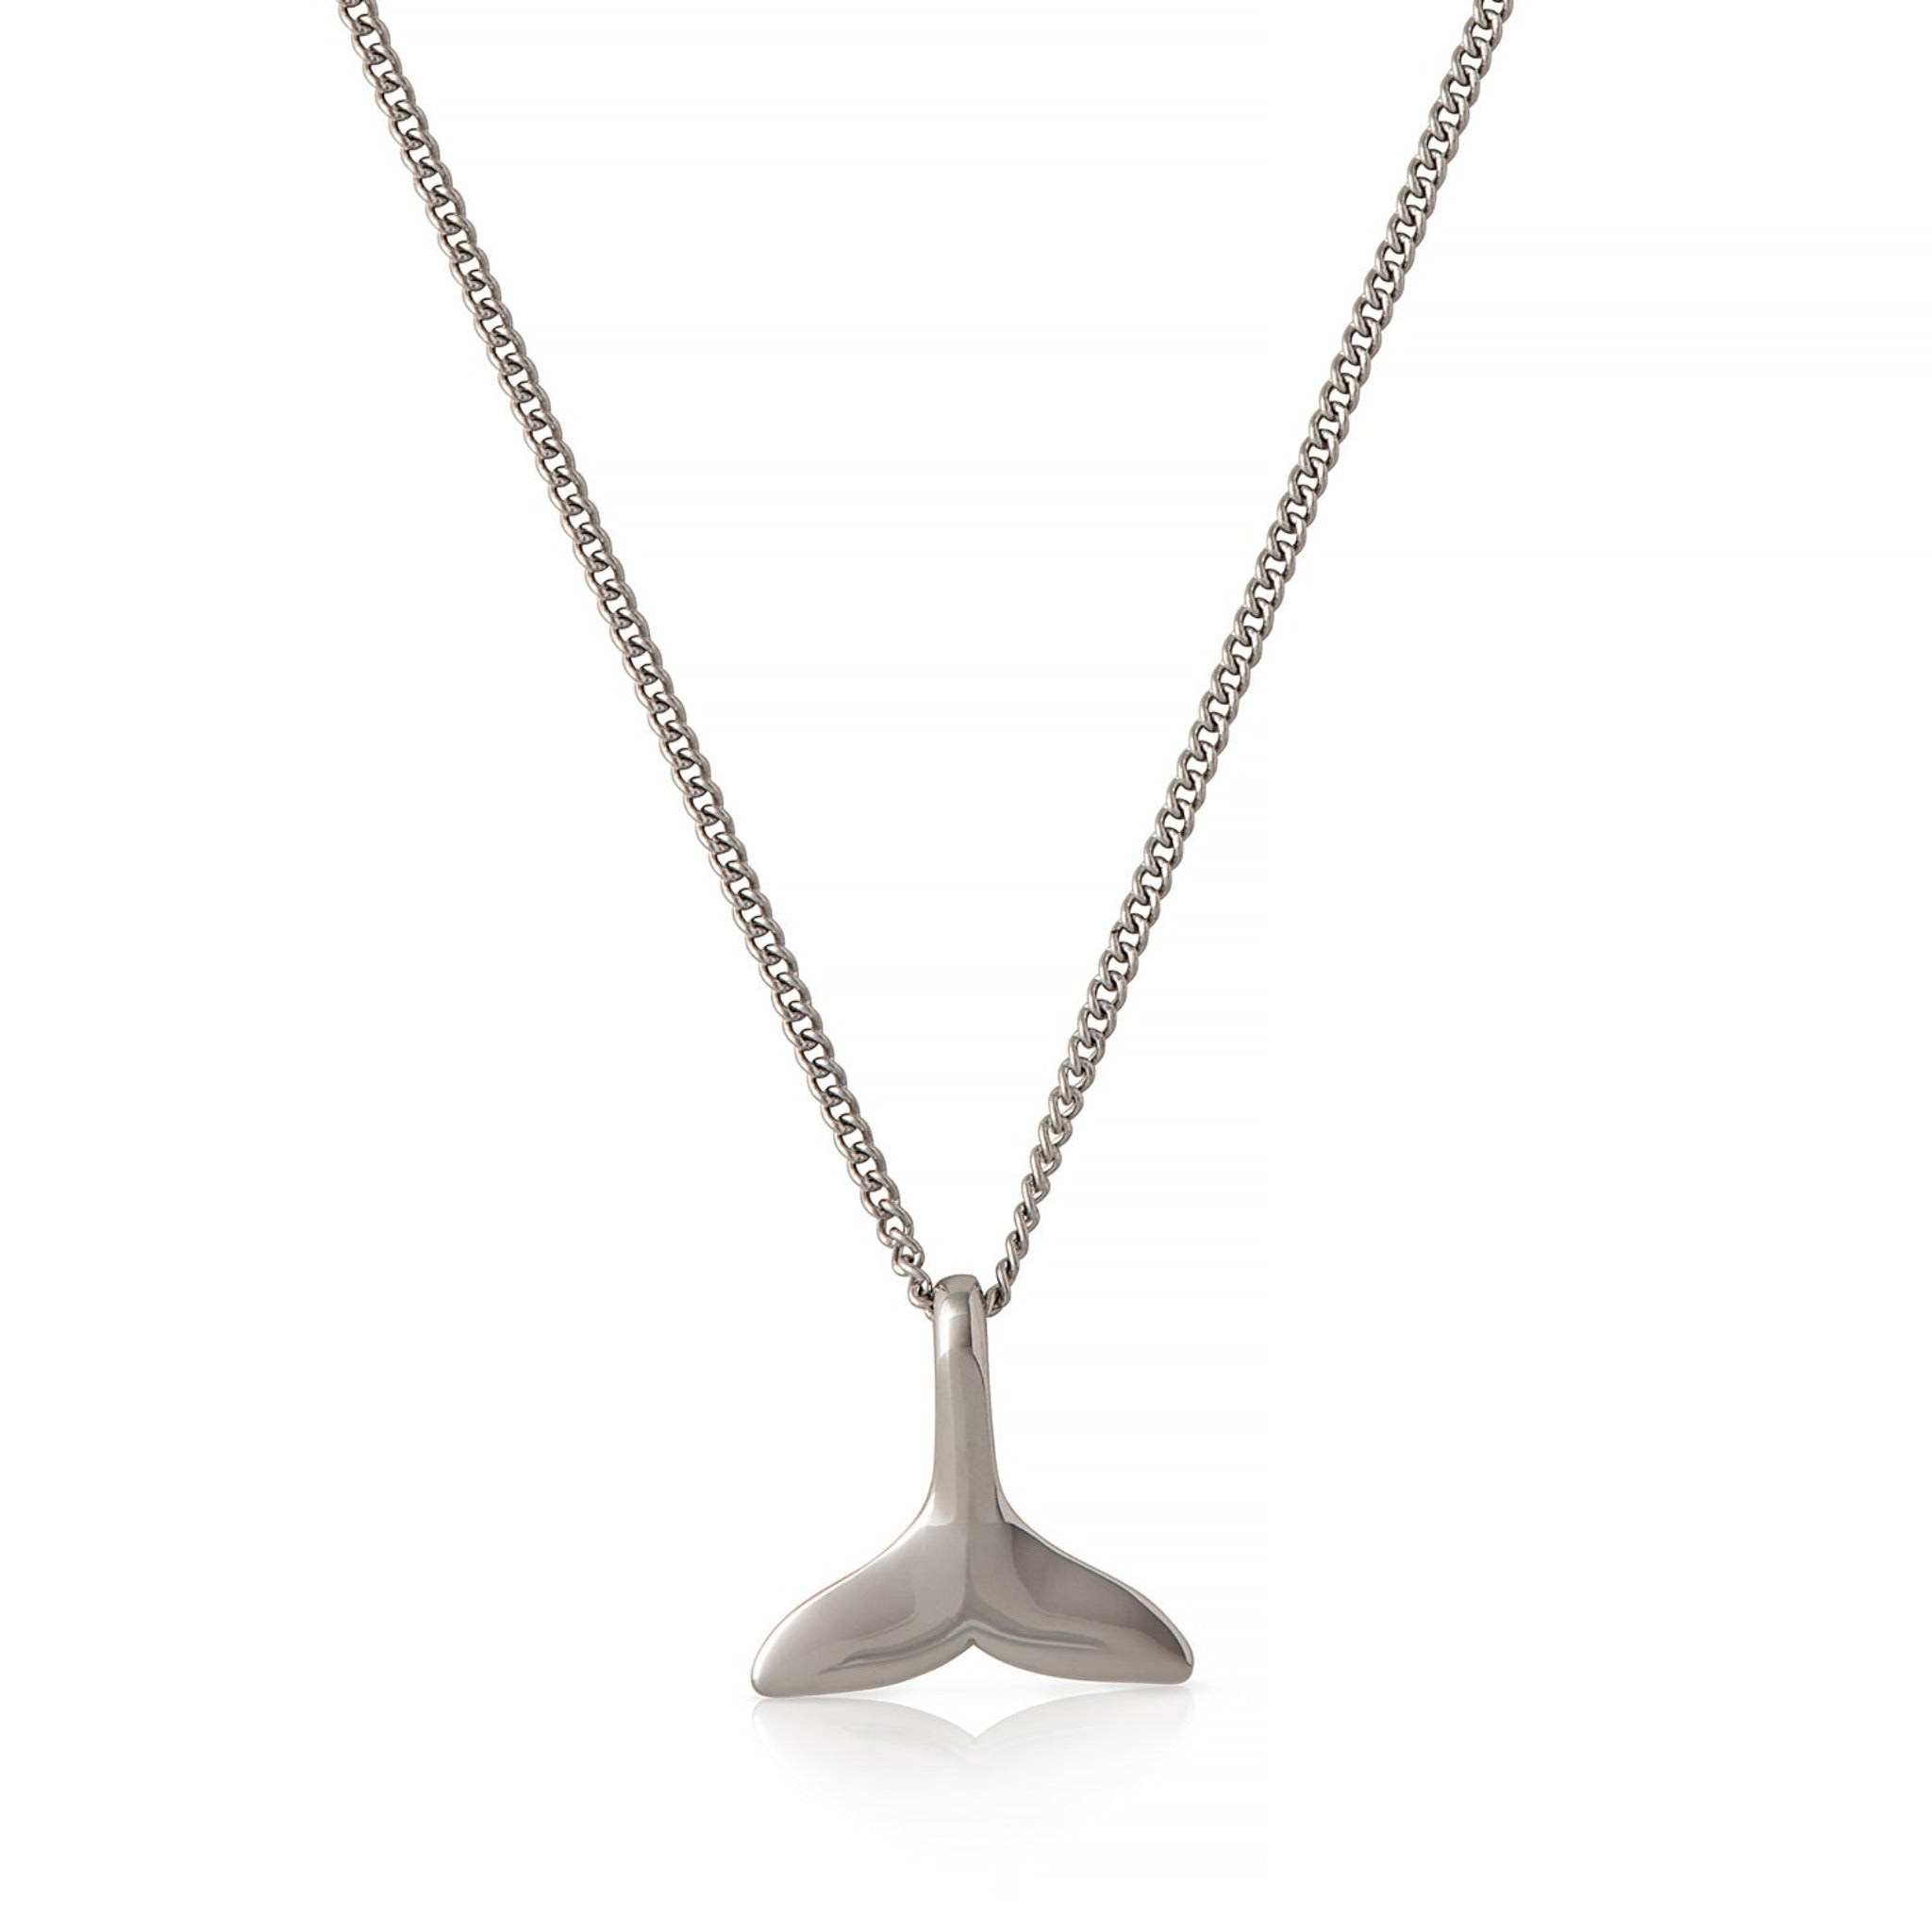 Stainless Steel Fish Tail Pendant and Chain